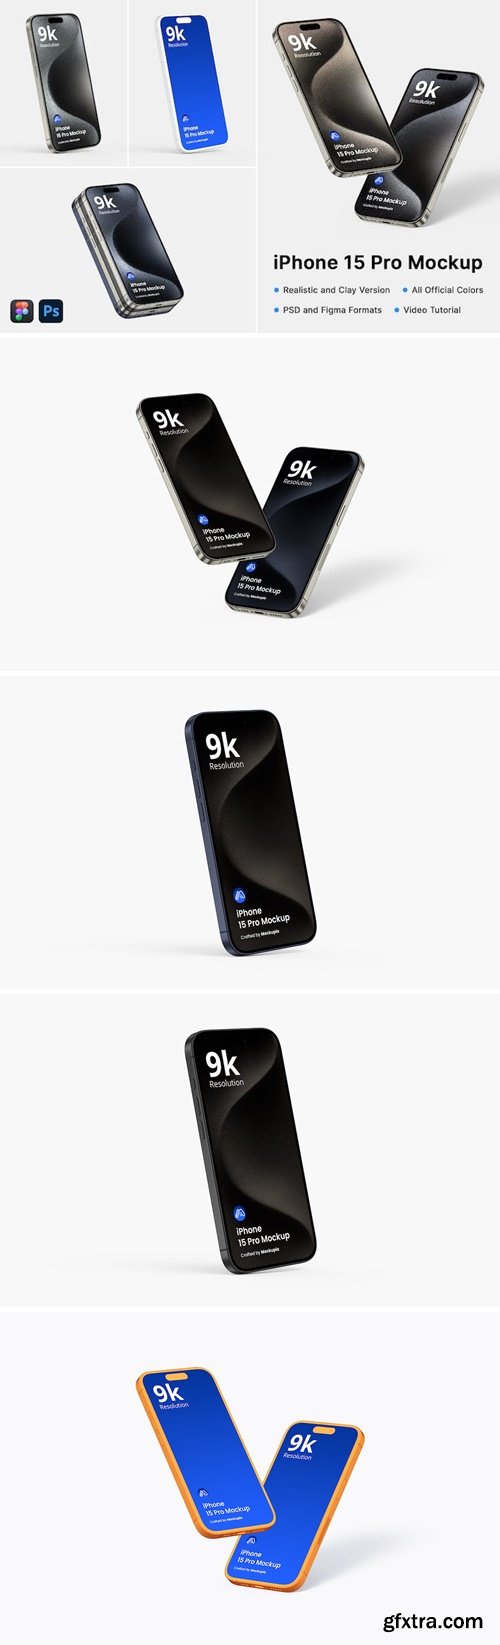 iPhone 15 Pro Realistic and Clay Mockup 7NCRZGW